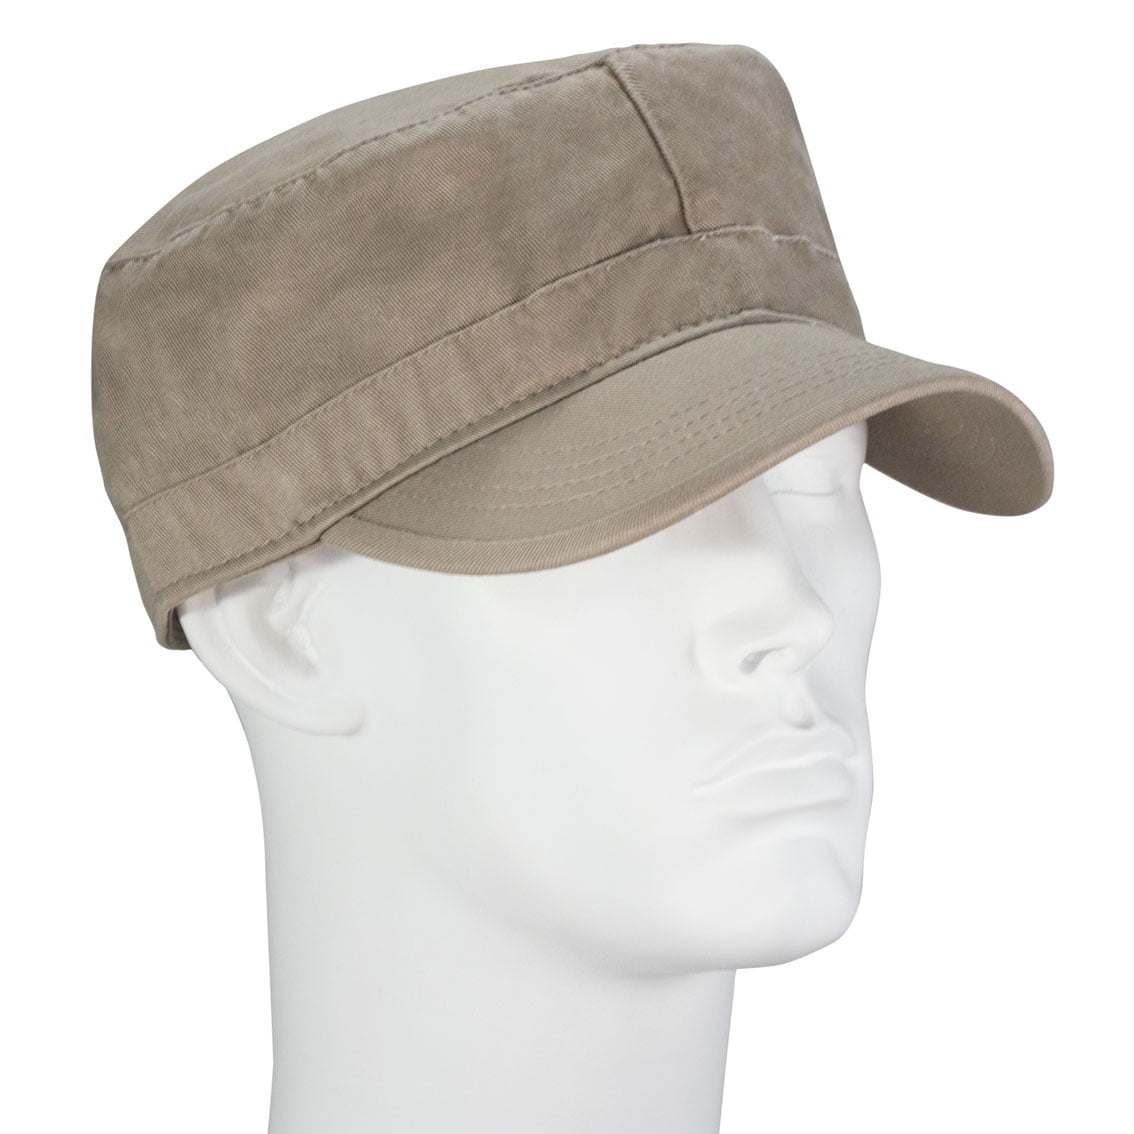 1pc Khaki Solid Castro Military Fatigue Army Hat - Fitted - Unconstructed - 100% Cotton